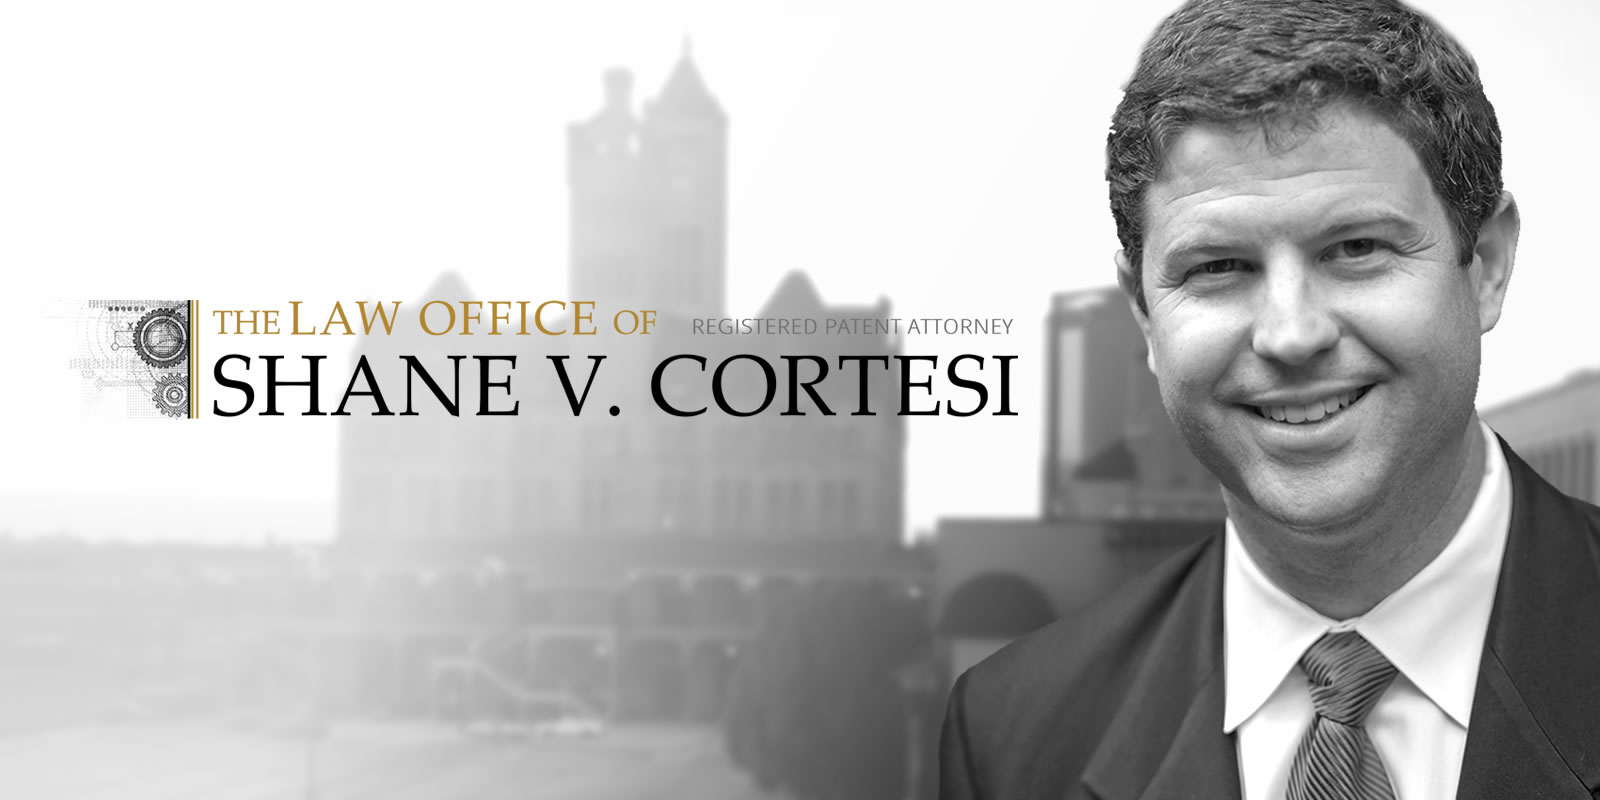 Contact The Law Office of Shane V. Cortesi in Nashville TN